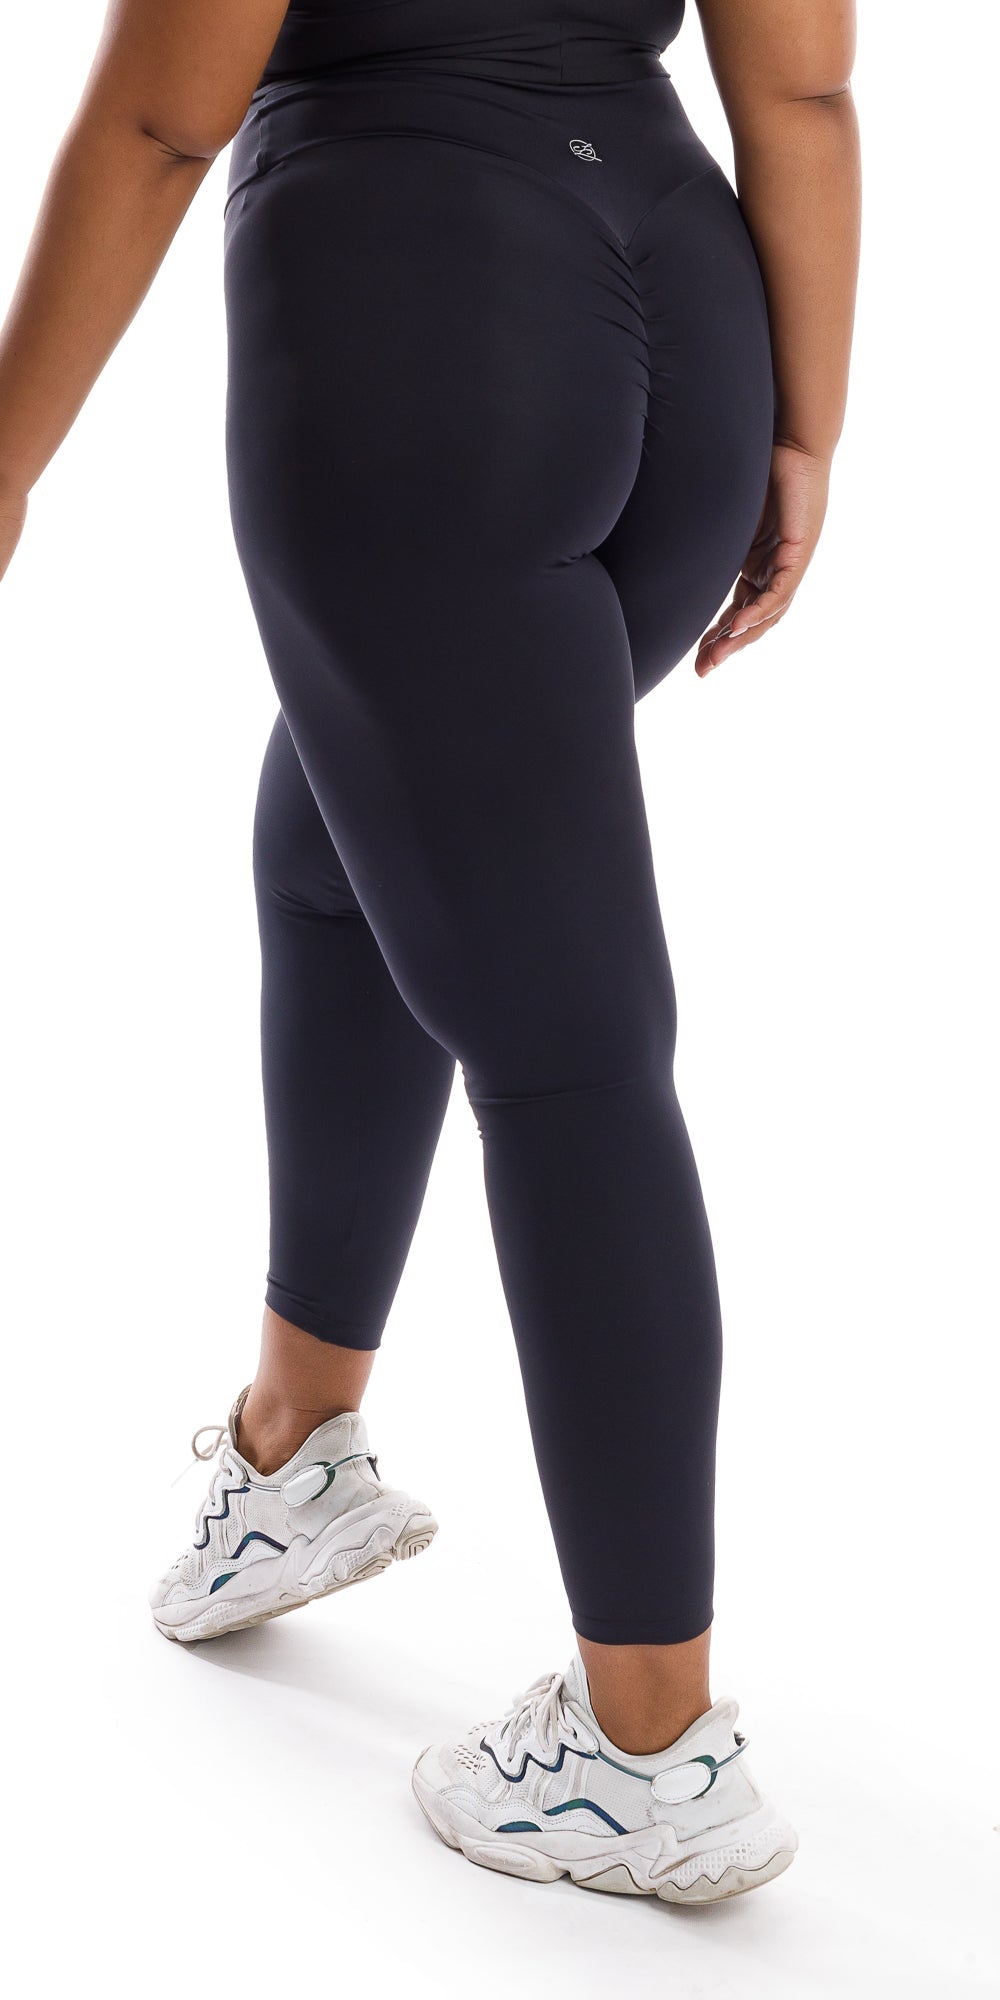 RQYYD Reduced Women's Plus Size High Waist Yoga Pants Tummy Control Workout  Ruched Butt Lifting Stretchy Leggings Textured Booty Tights(Gray,3XL) -  Walmart.com